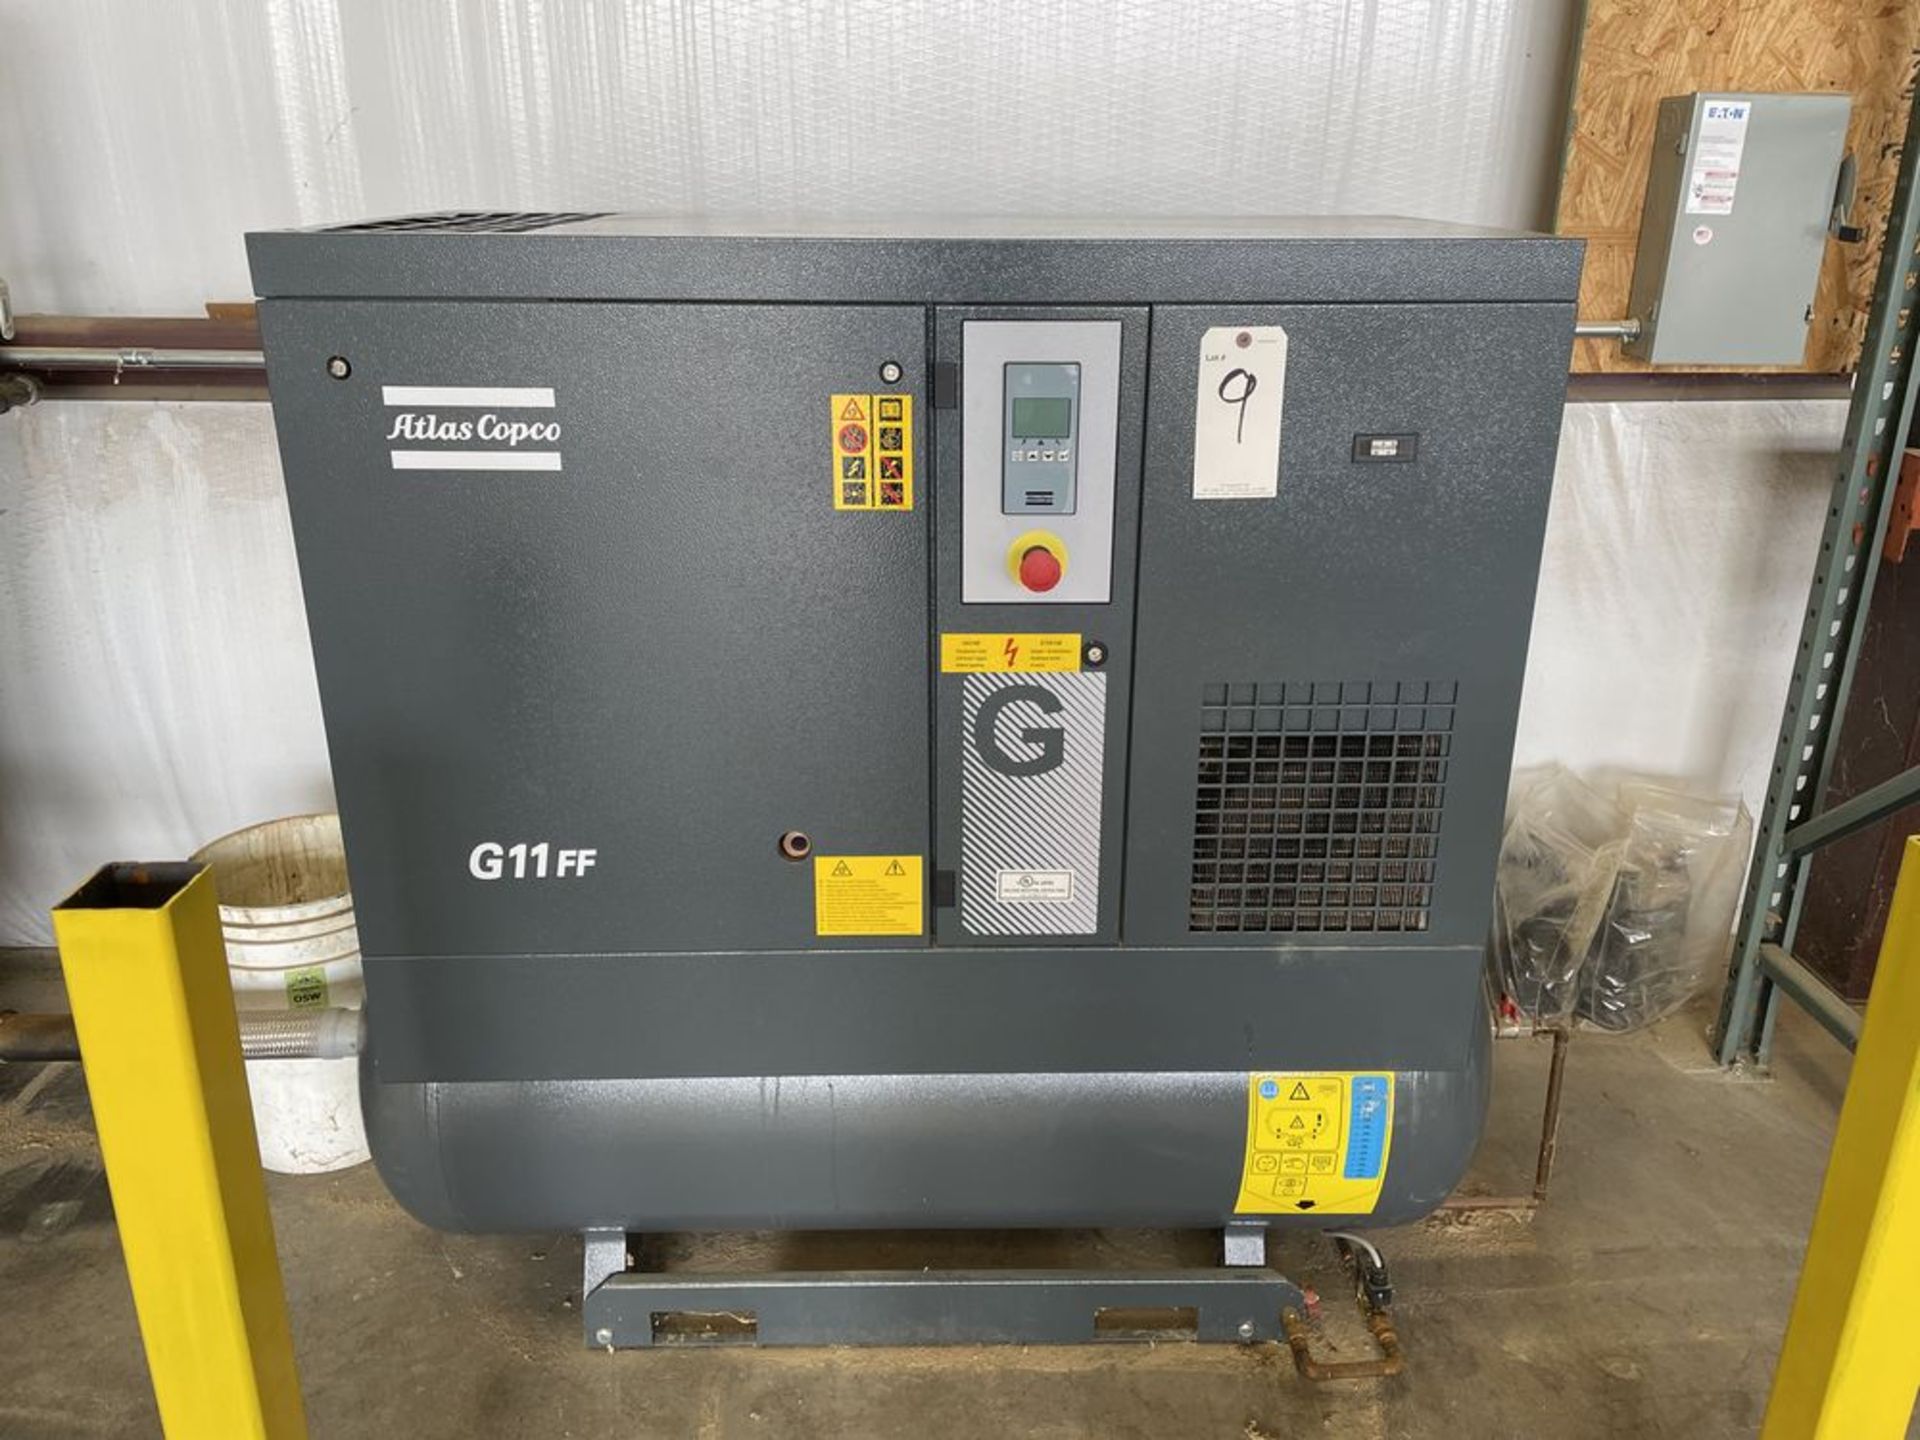 2018 Atlas Copco G11FF 15 HP Air Compressor. SN ITJ180185, Year 2018. Equipped with 125 PSI